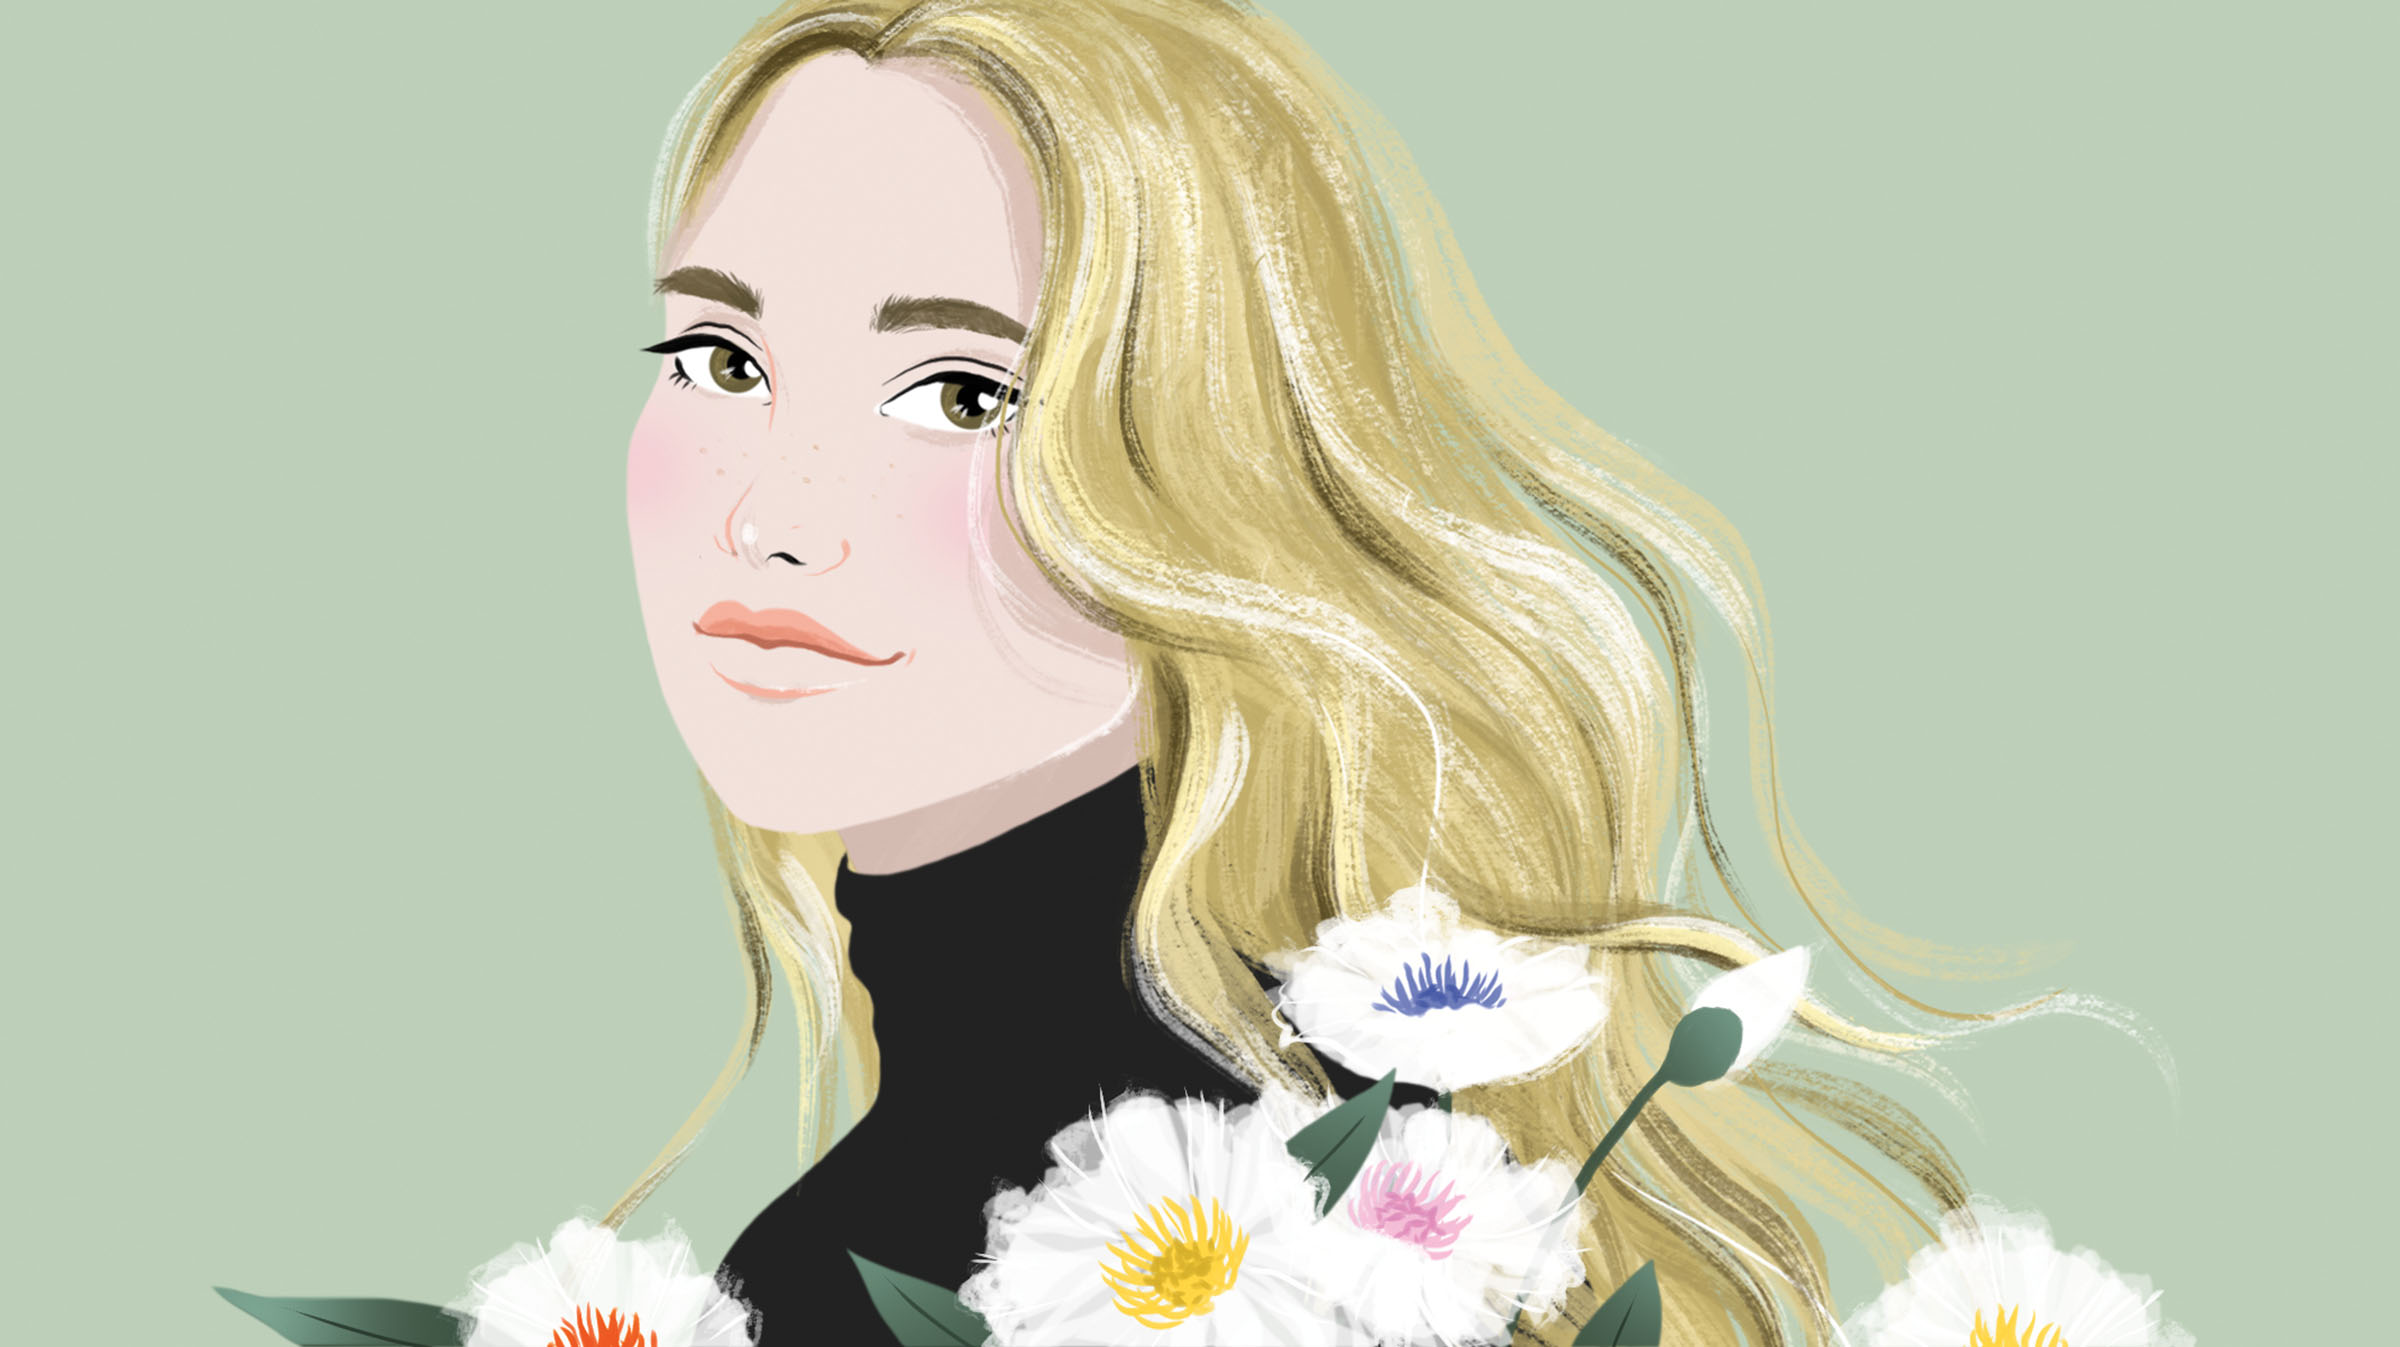 An illustration of a woman with blonde hair in front of a collection of white flowers